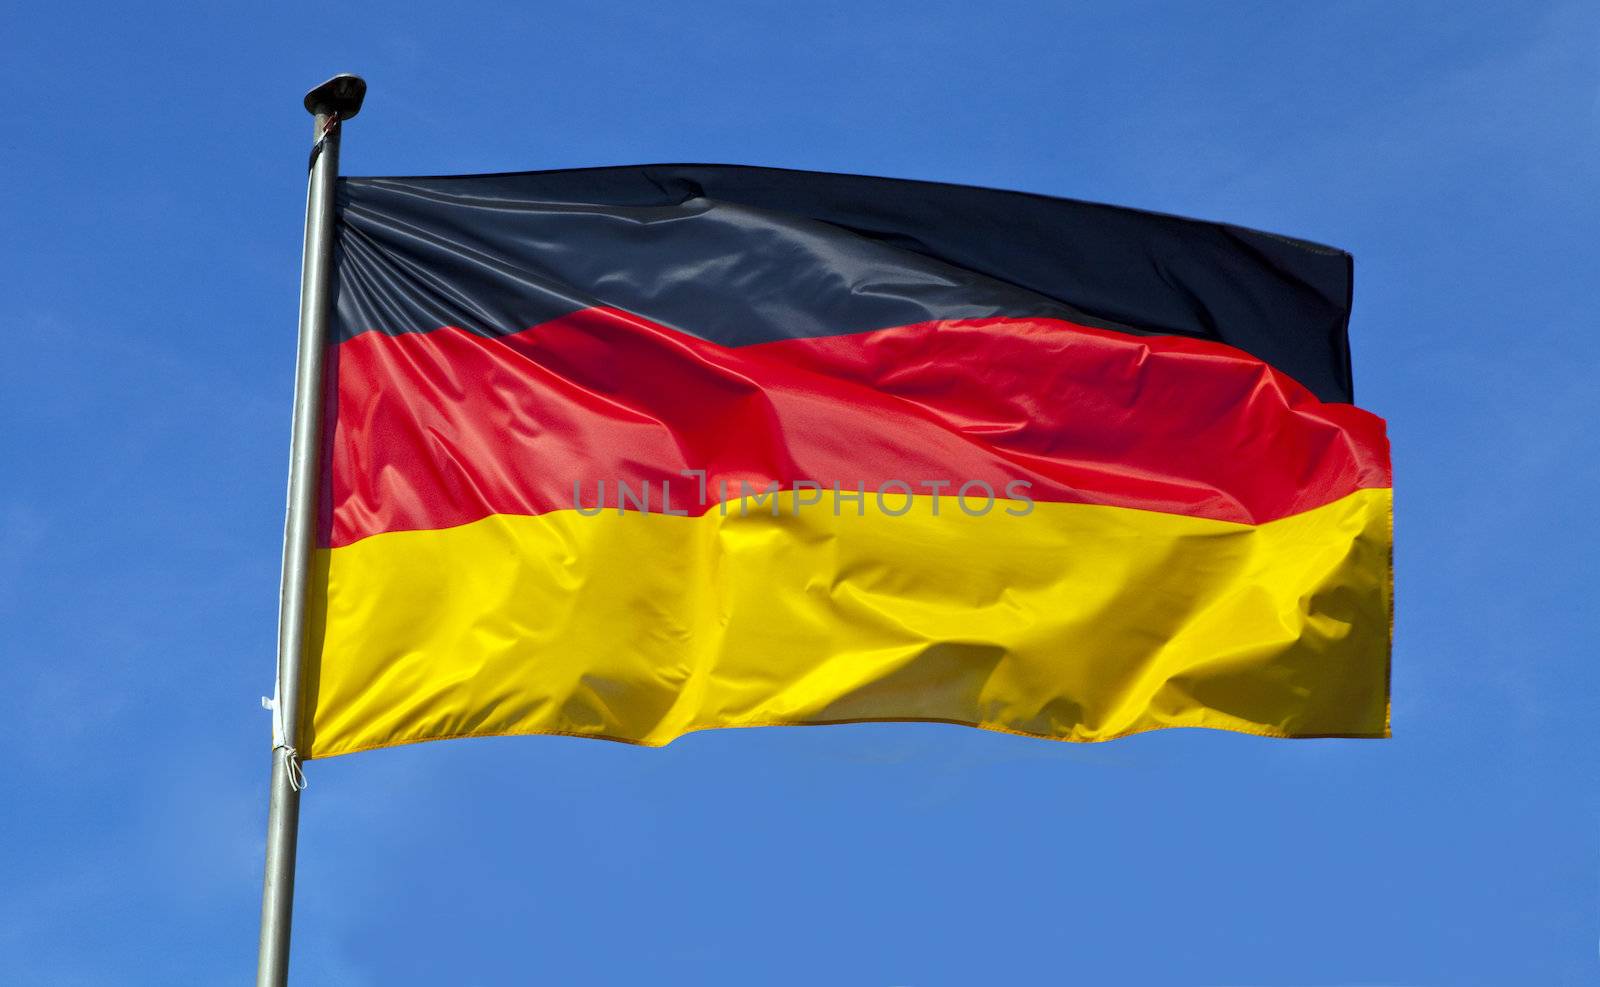 The German flag flying over a clear blue sky.